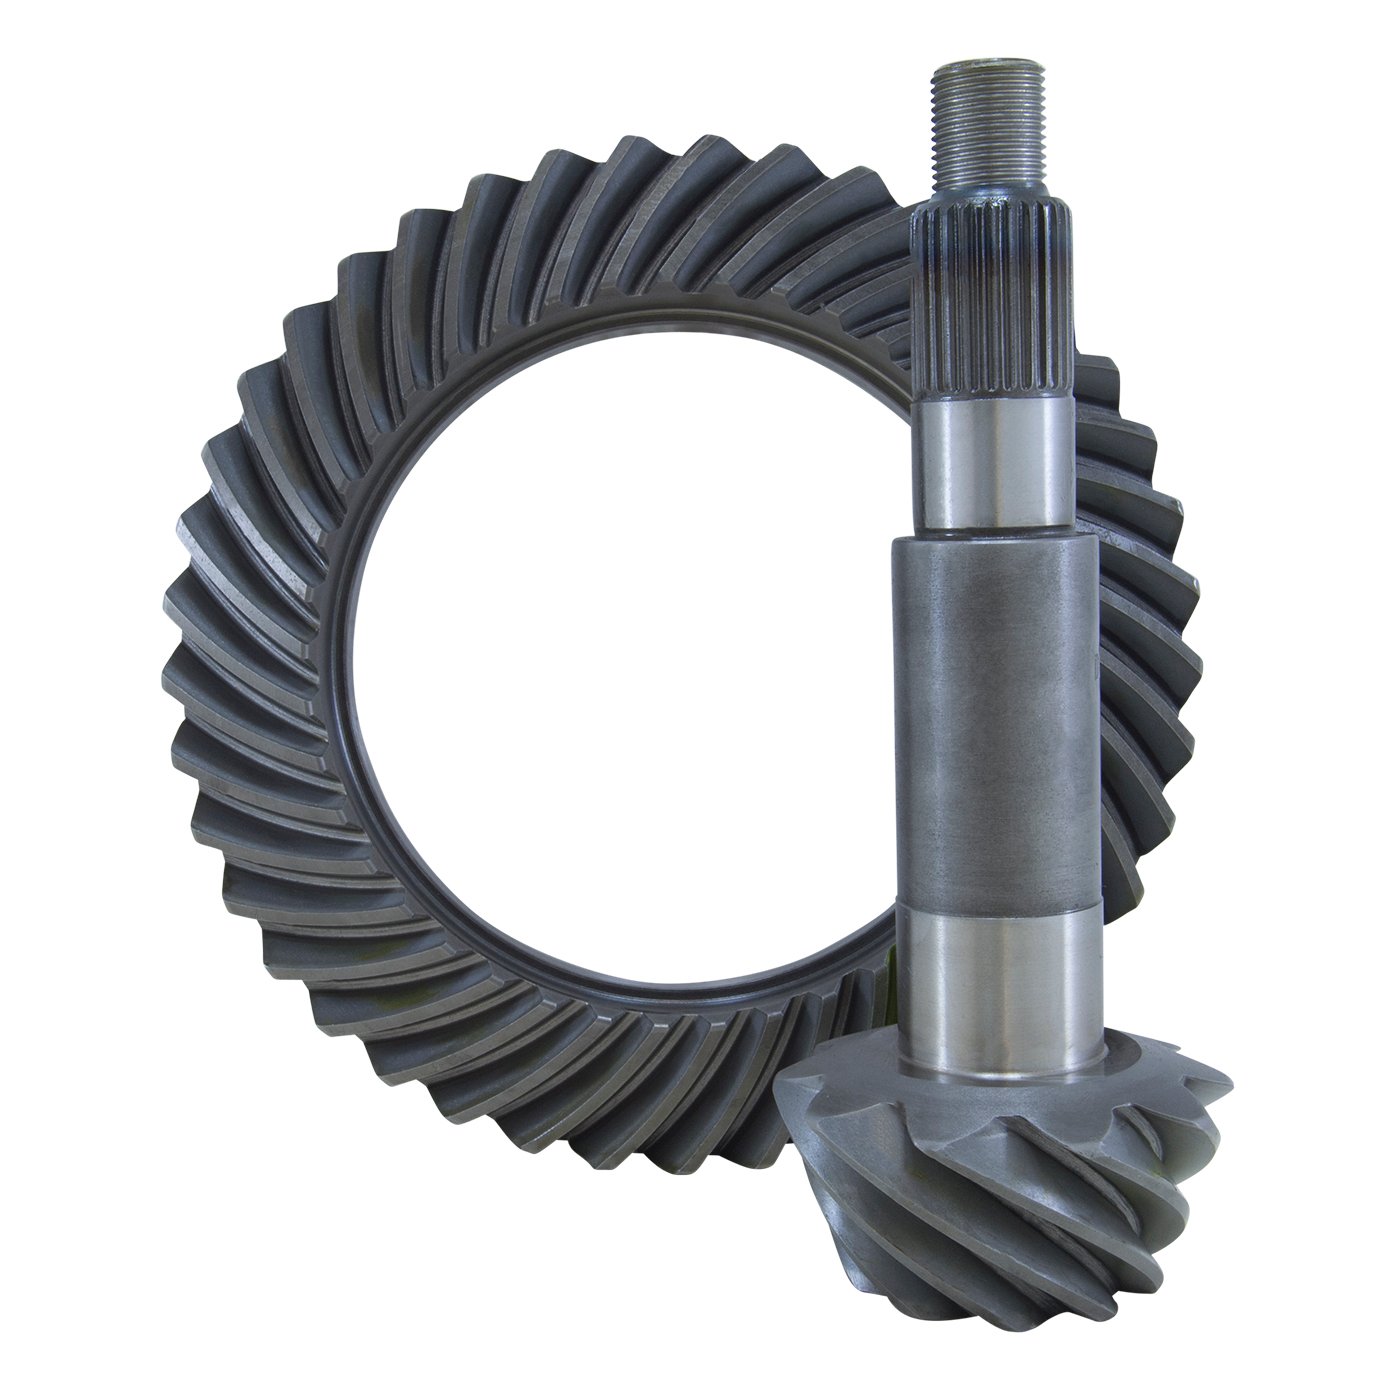 High Performance Replacement Ring & Pinion Gear Set,